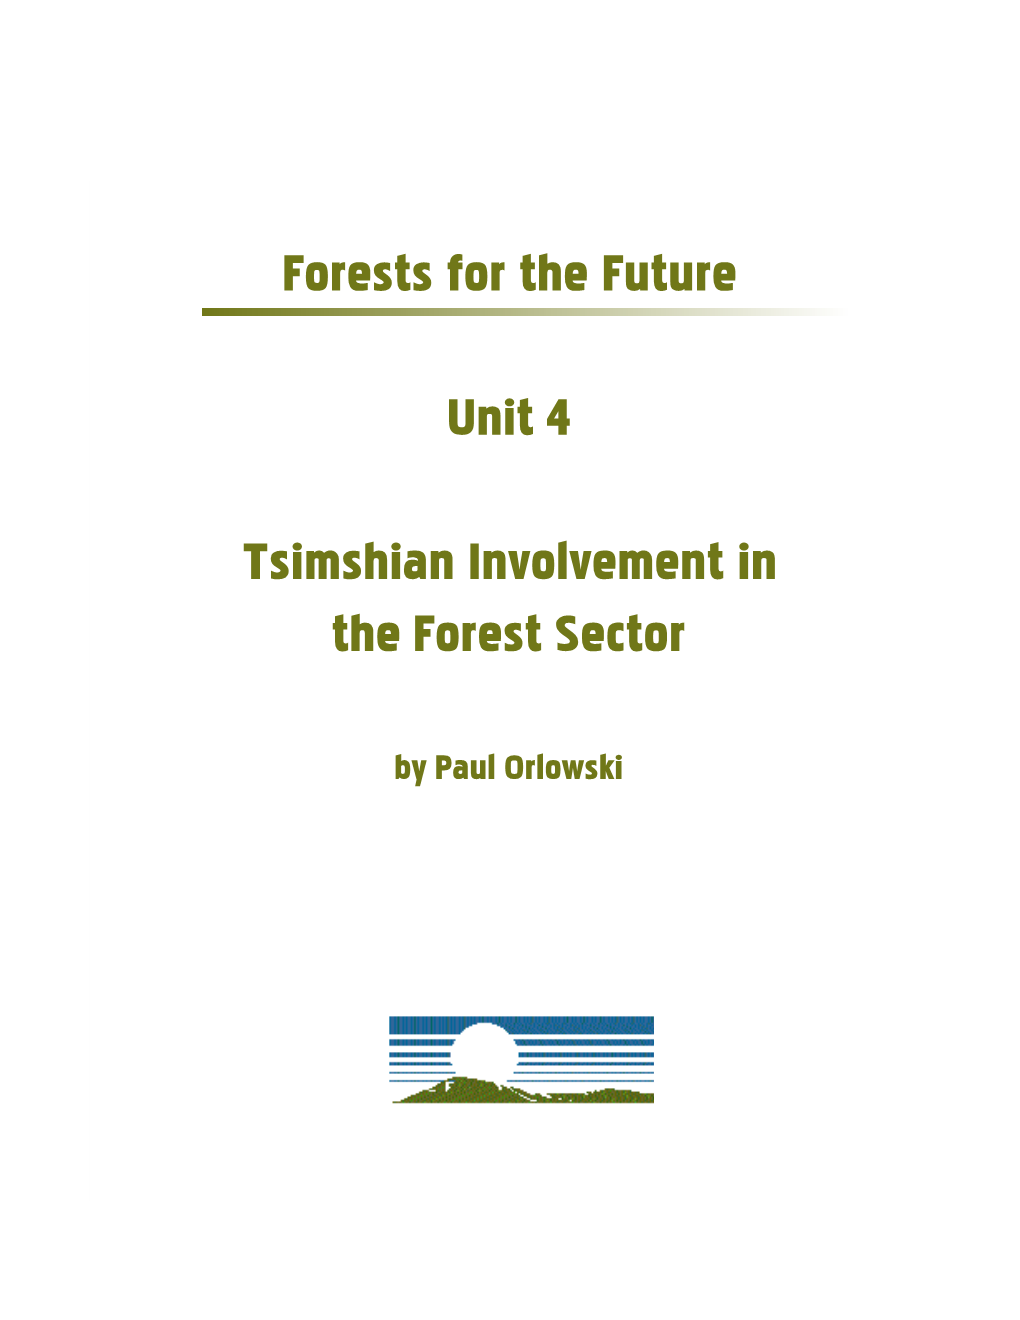 Tsimshian Involvement in the Forest Sector